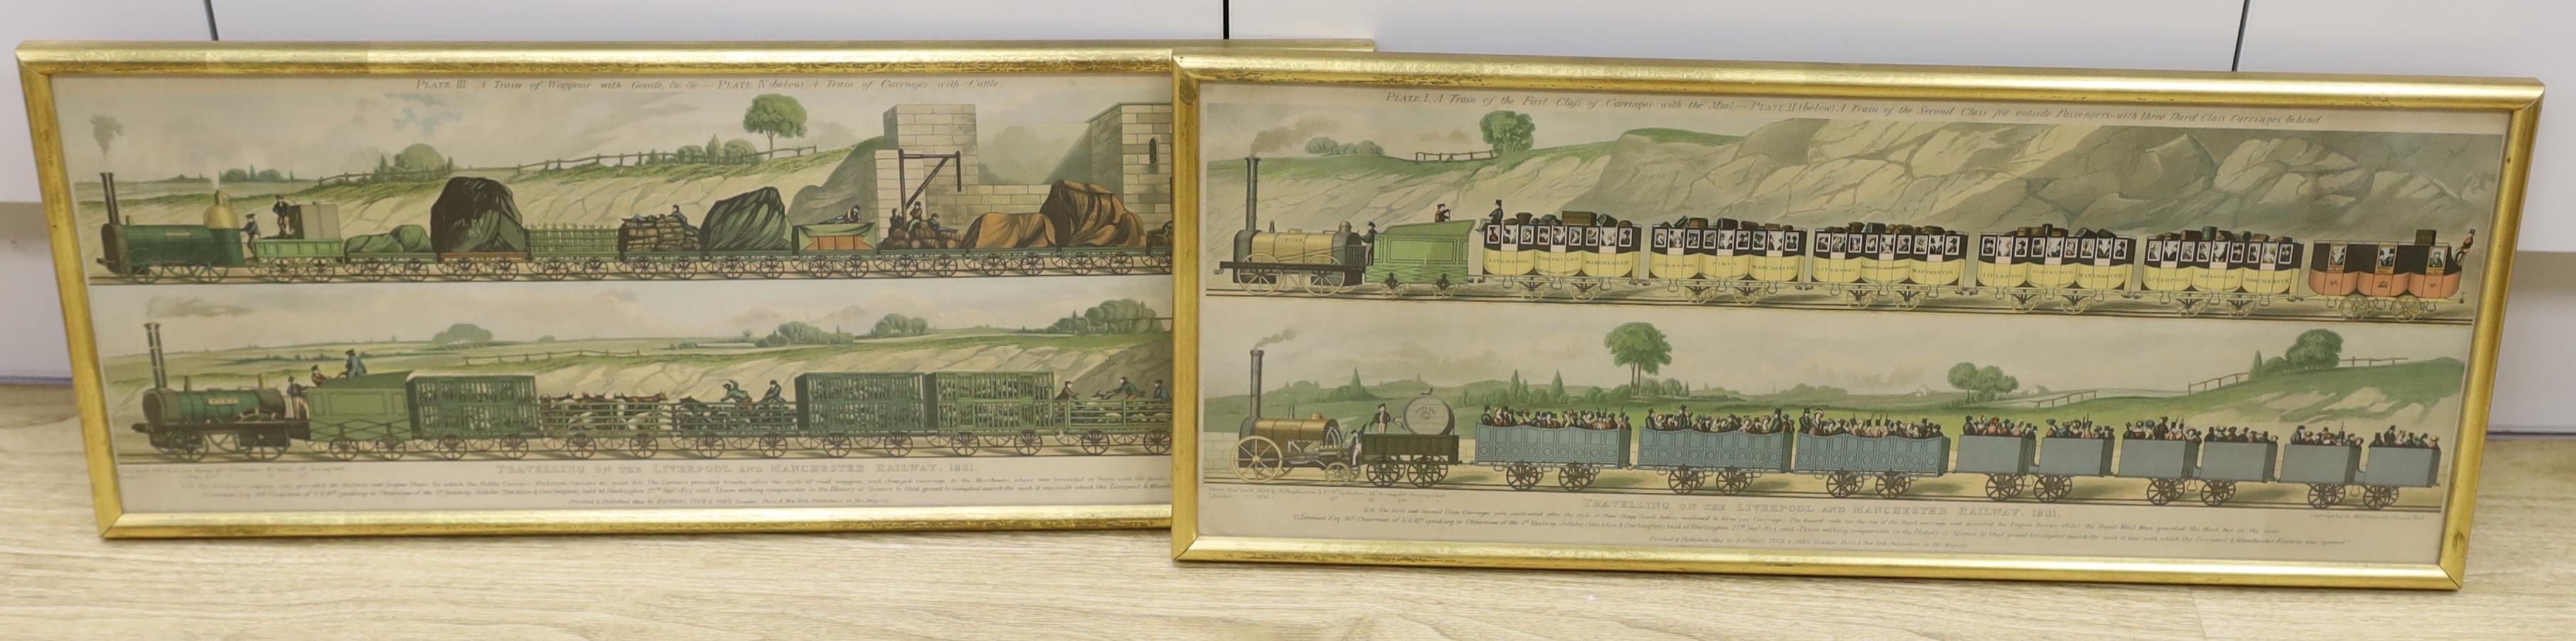 A pair of 19th century railway interest chromolithographs, ‘Travelling on the Liverpool and Manchester Railway, 1831’, publ. 1894 by Raphael Tuck & Sons, 24.5 x 64cm